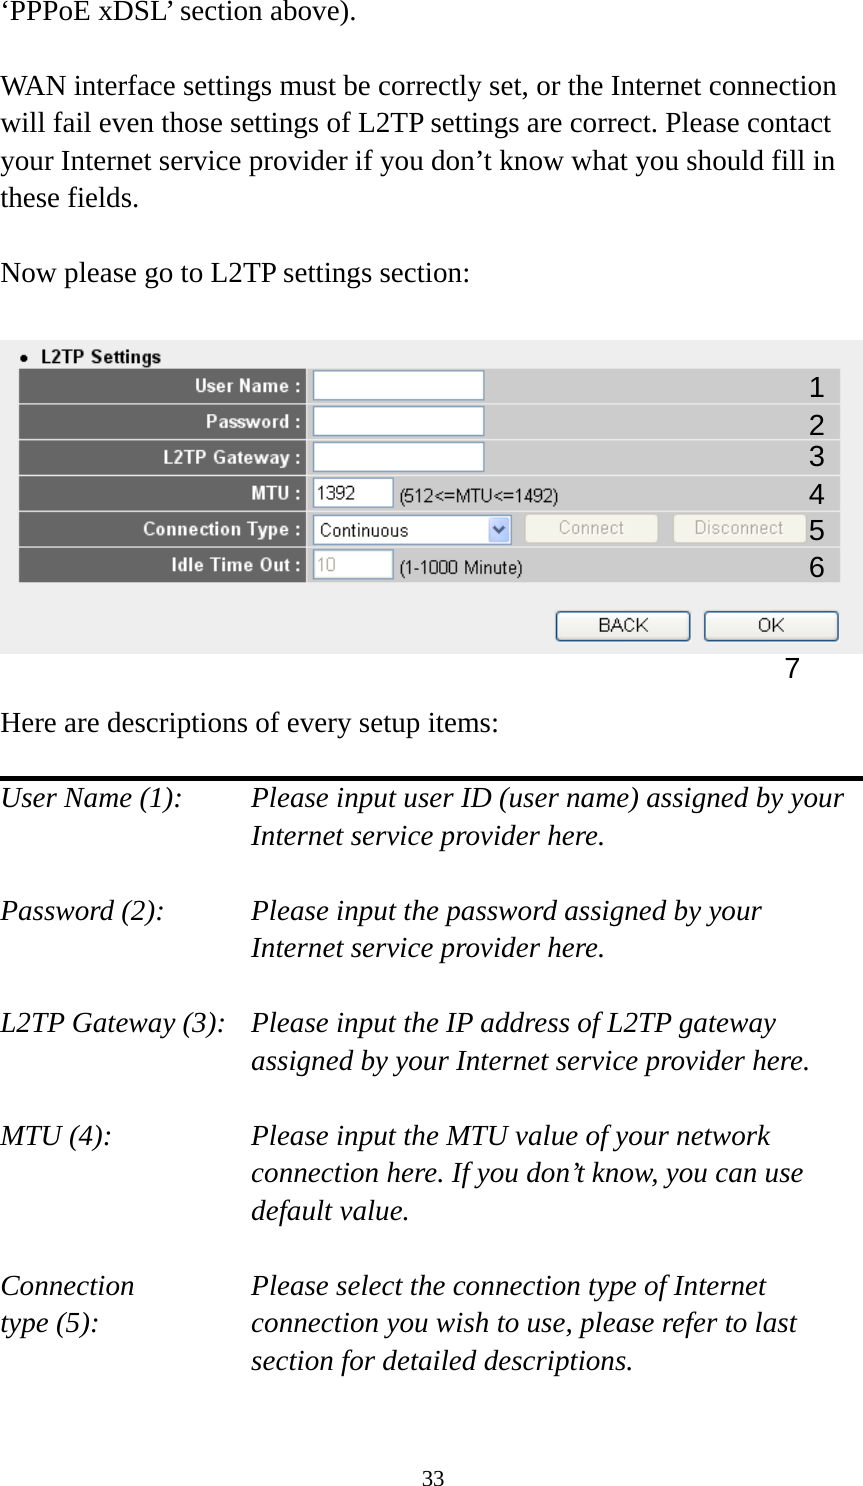 33 ‘PPPoE xDSL’ section above).    WAN interface settings must be correctly set, or the Internet connection will fail even those settings of L2TP settings are correct. Please contact your Internet service provider if you don’t know what you should fill in these fields.  Now please go to L2TP settings section:    Here are descriptions of every setup items:  User Name (1):     Please input user ID (user name) assigned by your      Internet service provider here.  Password (2):    Please input the password assigned by your Internet service provider here.  L2TP Gateway (3):   Please input the IP address of L2TP gateway assigned by your Internet service provider here.  MTU (4):    Please input the MTU value of your network connection here. If you don’t know, you can use default value.  Connection       Please select the connection type of Internet type (5):    connection you wish to use, please refer to last section for detailed descriptions.  1 2 4 3 5 7 6 